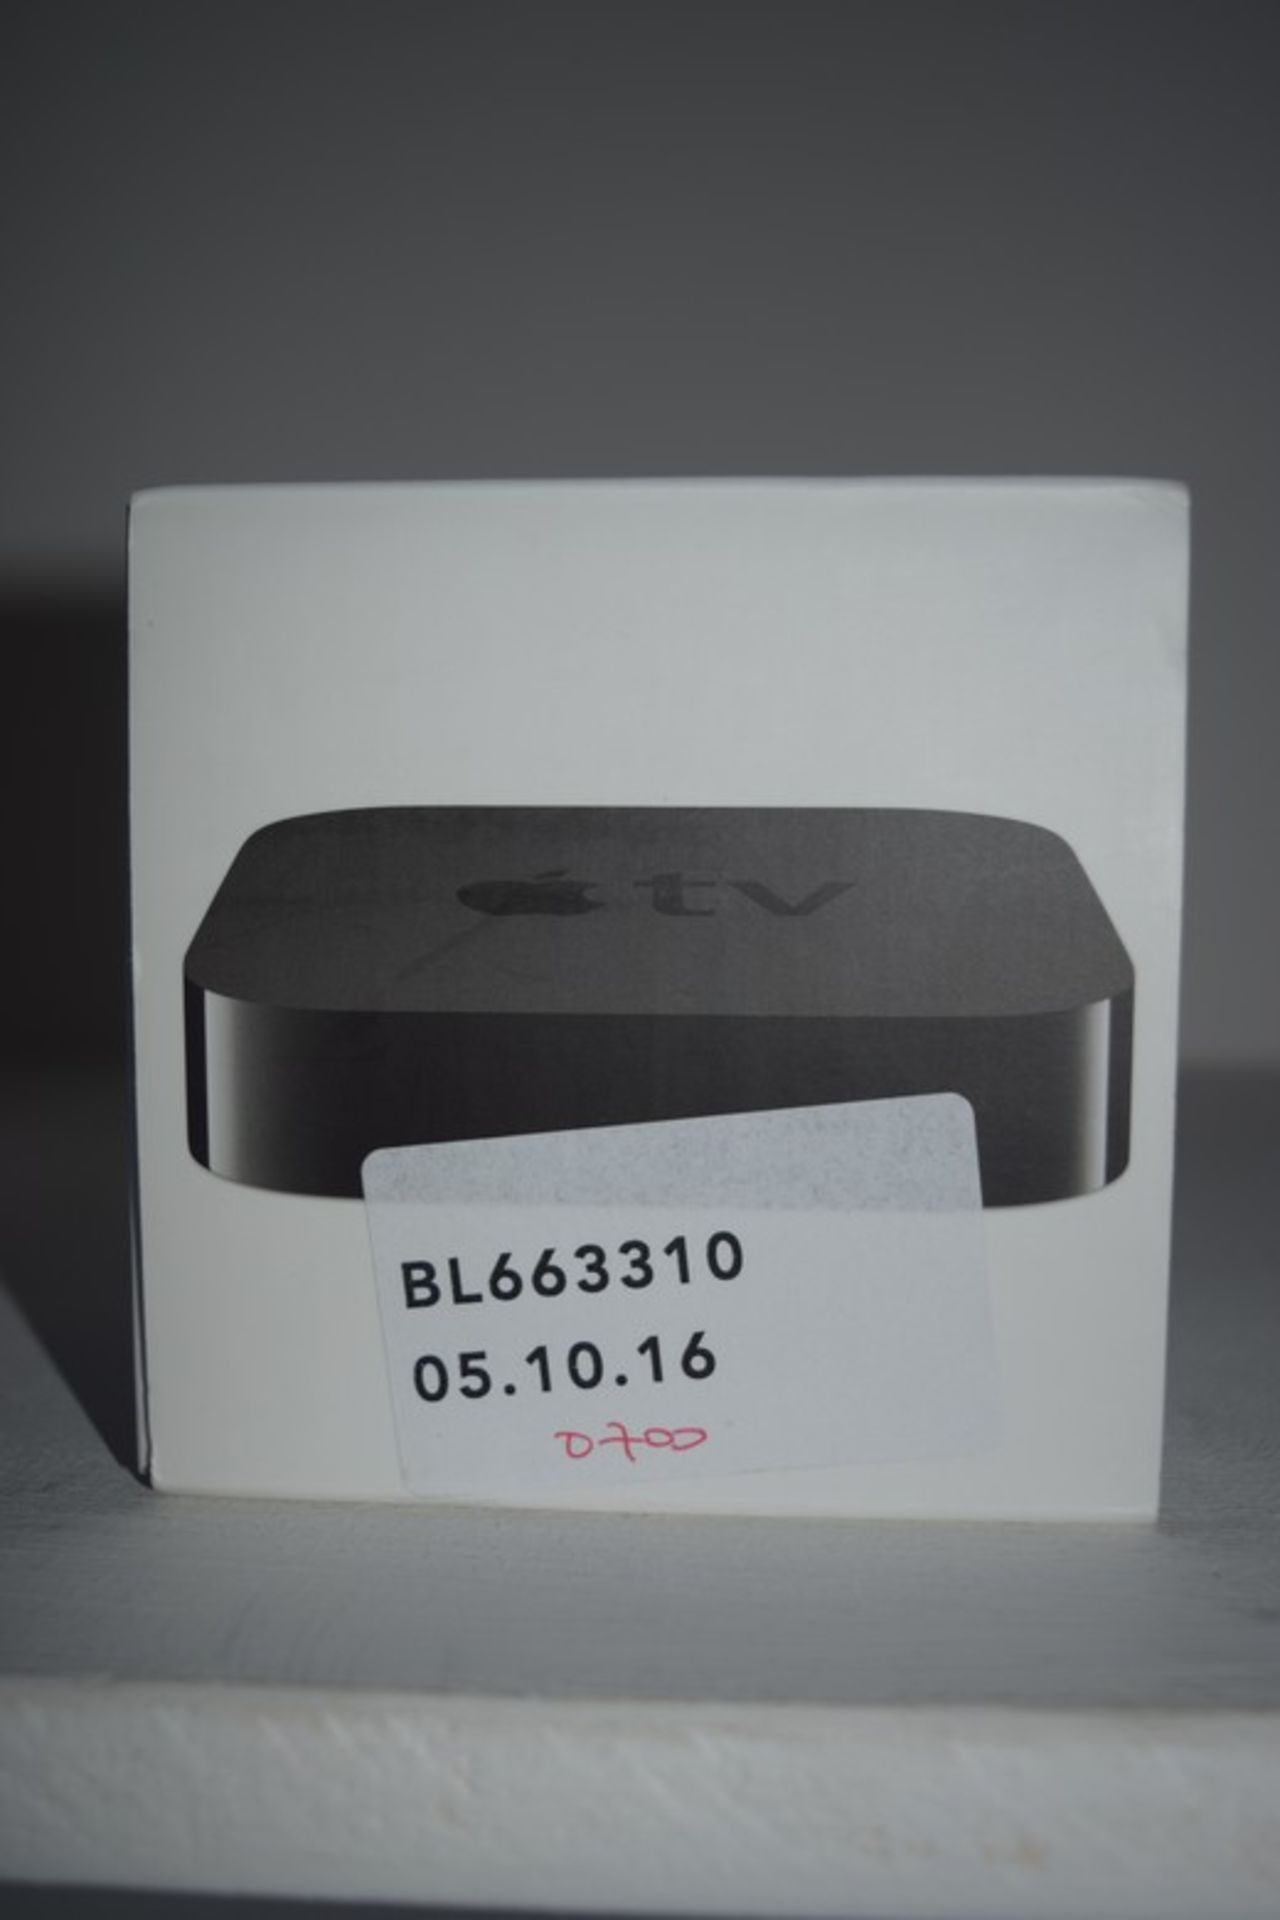 1 x BOXED APPLE TV RRP £65 (05.10.2016) *PLEASE NOTE THAT THE BID PRICE IS MULTIPLIED BY THE